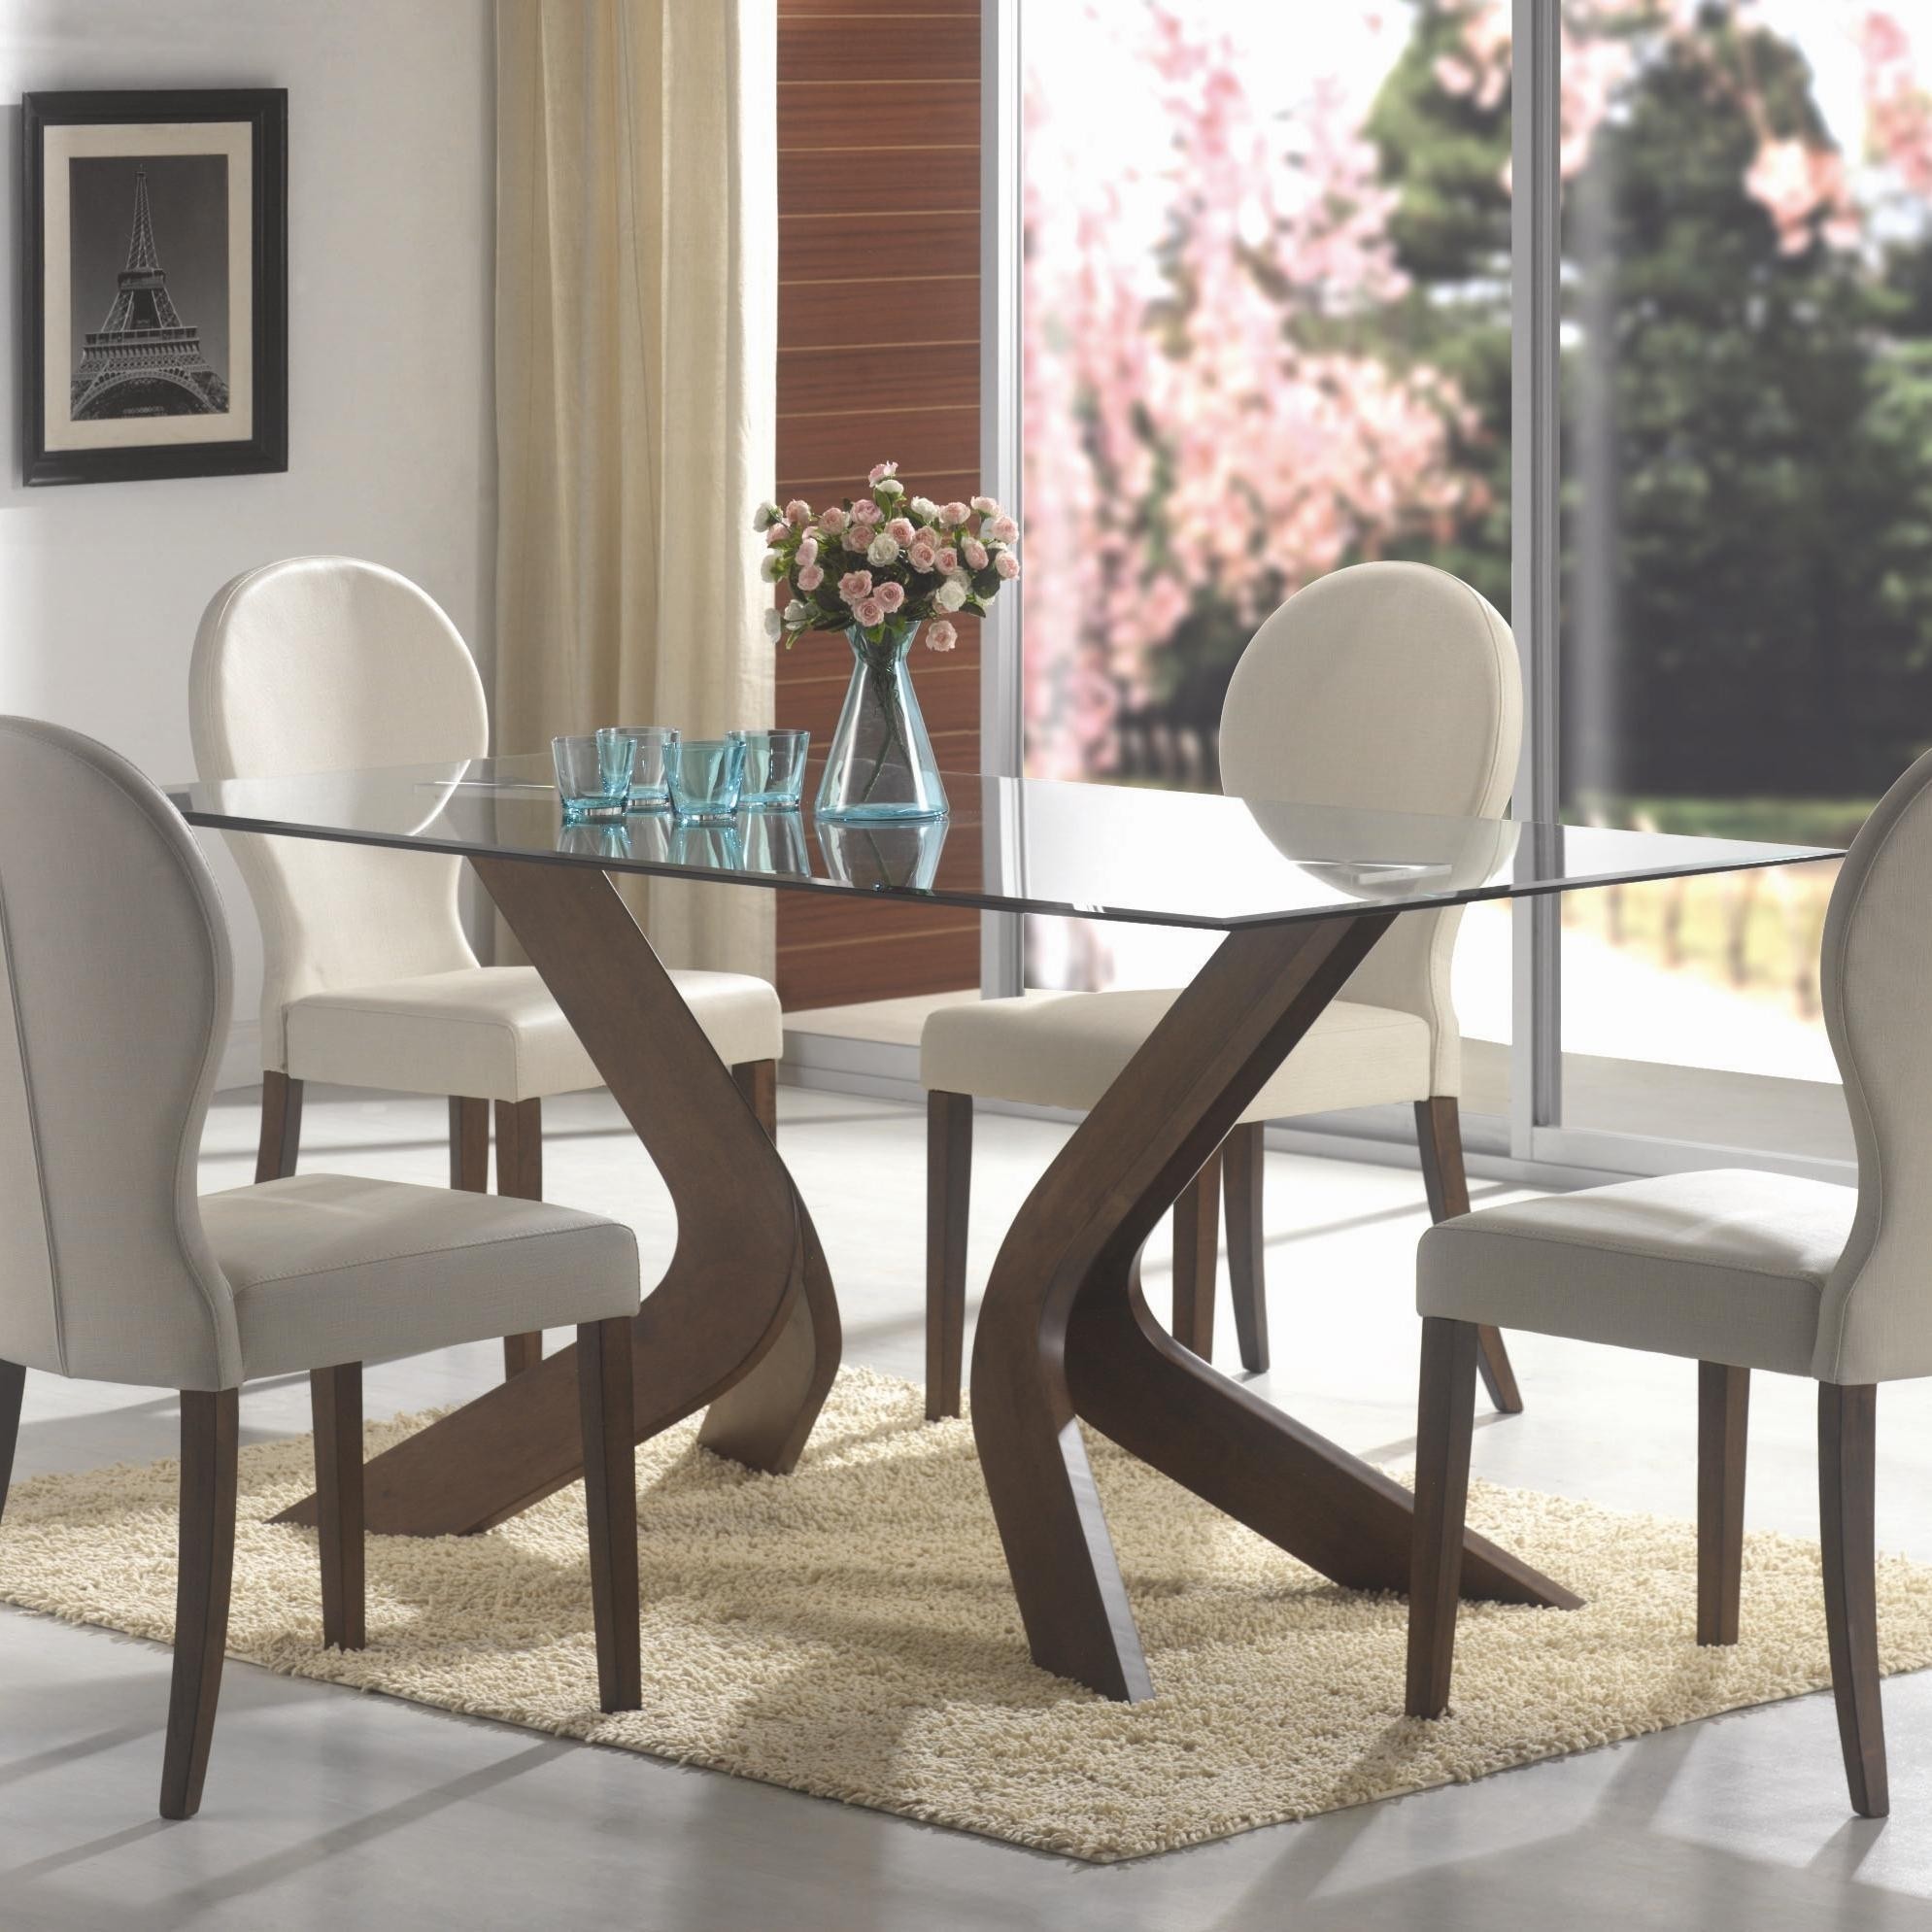 Dining room table base ideas